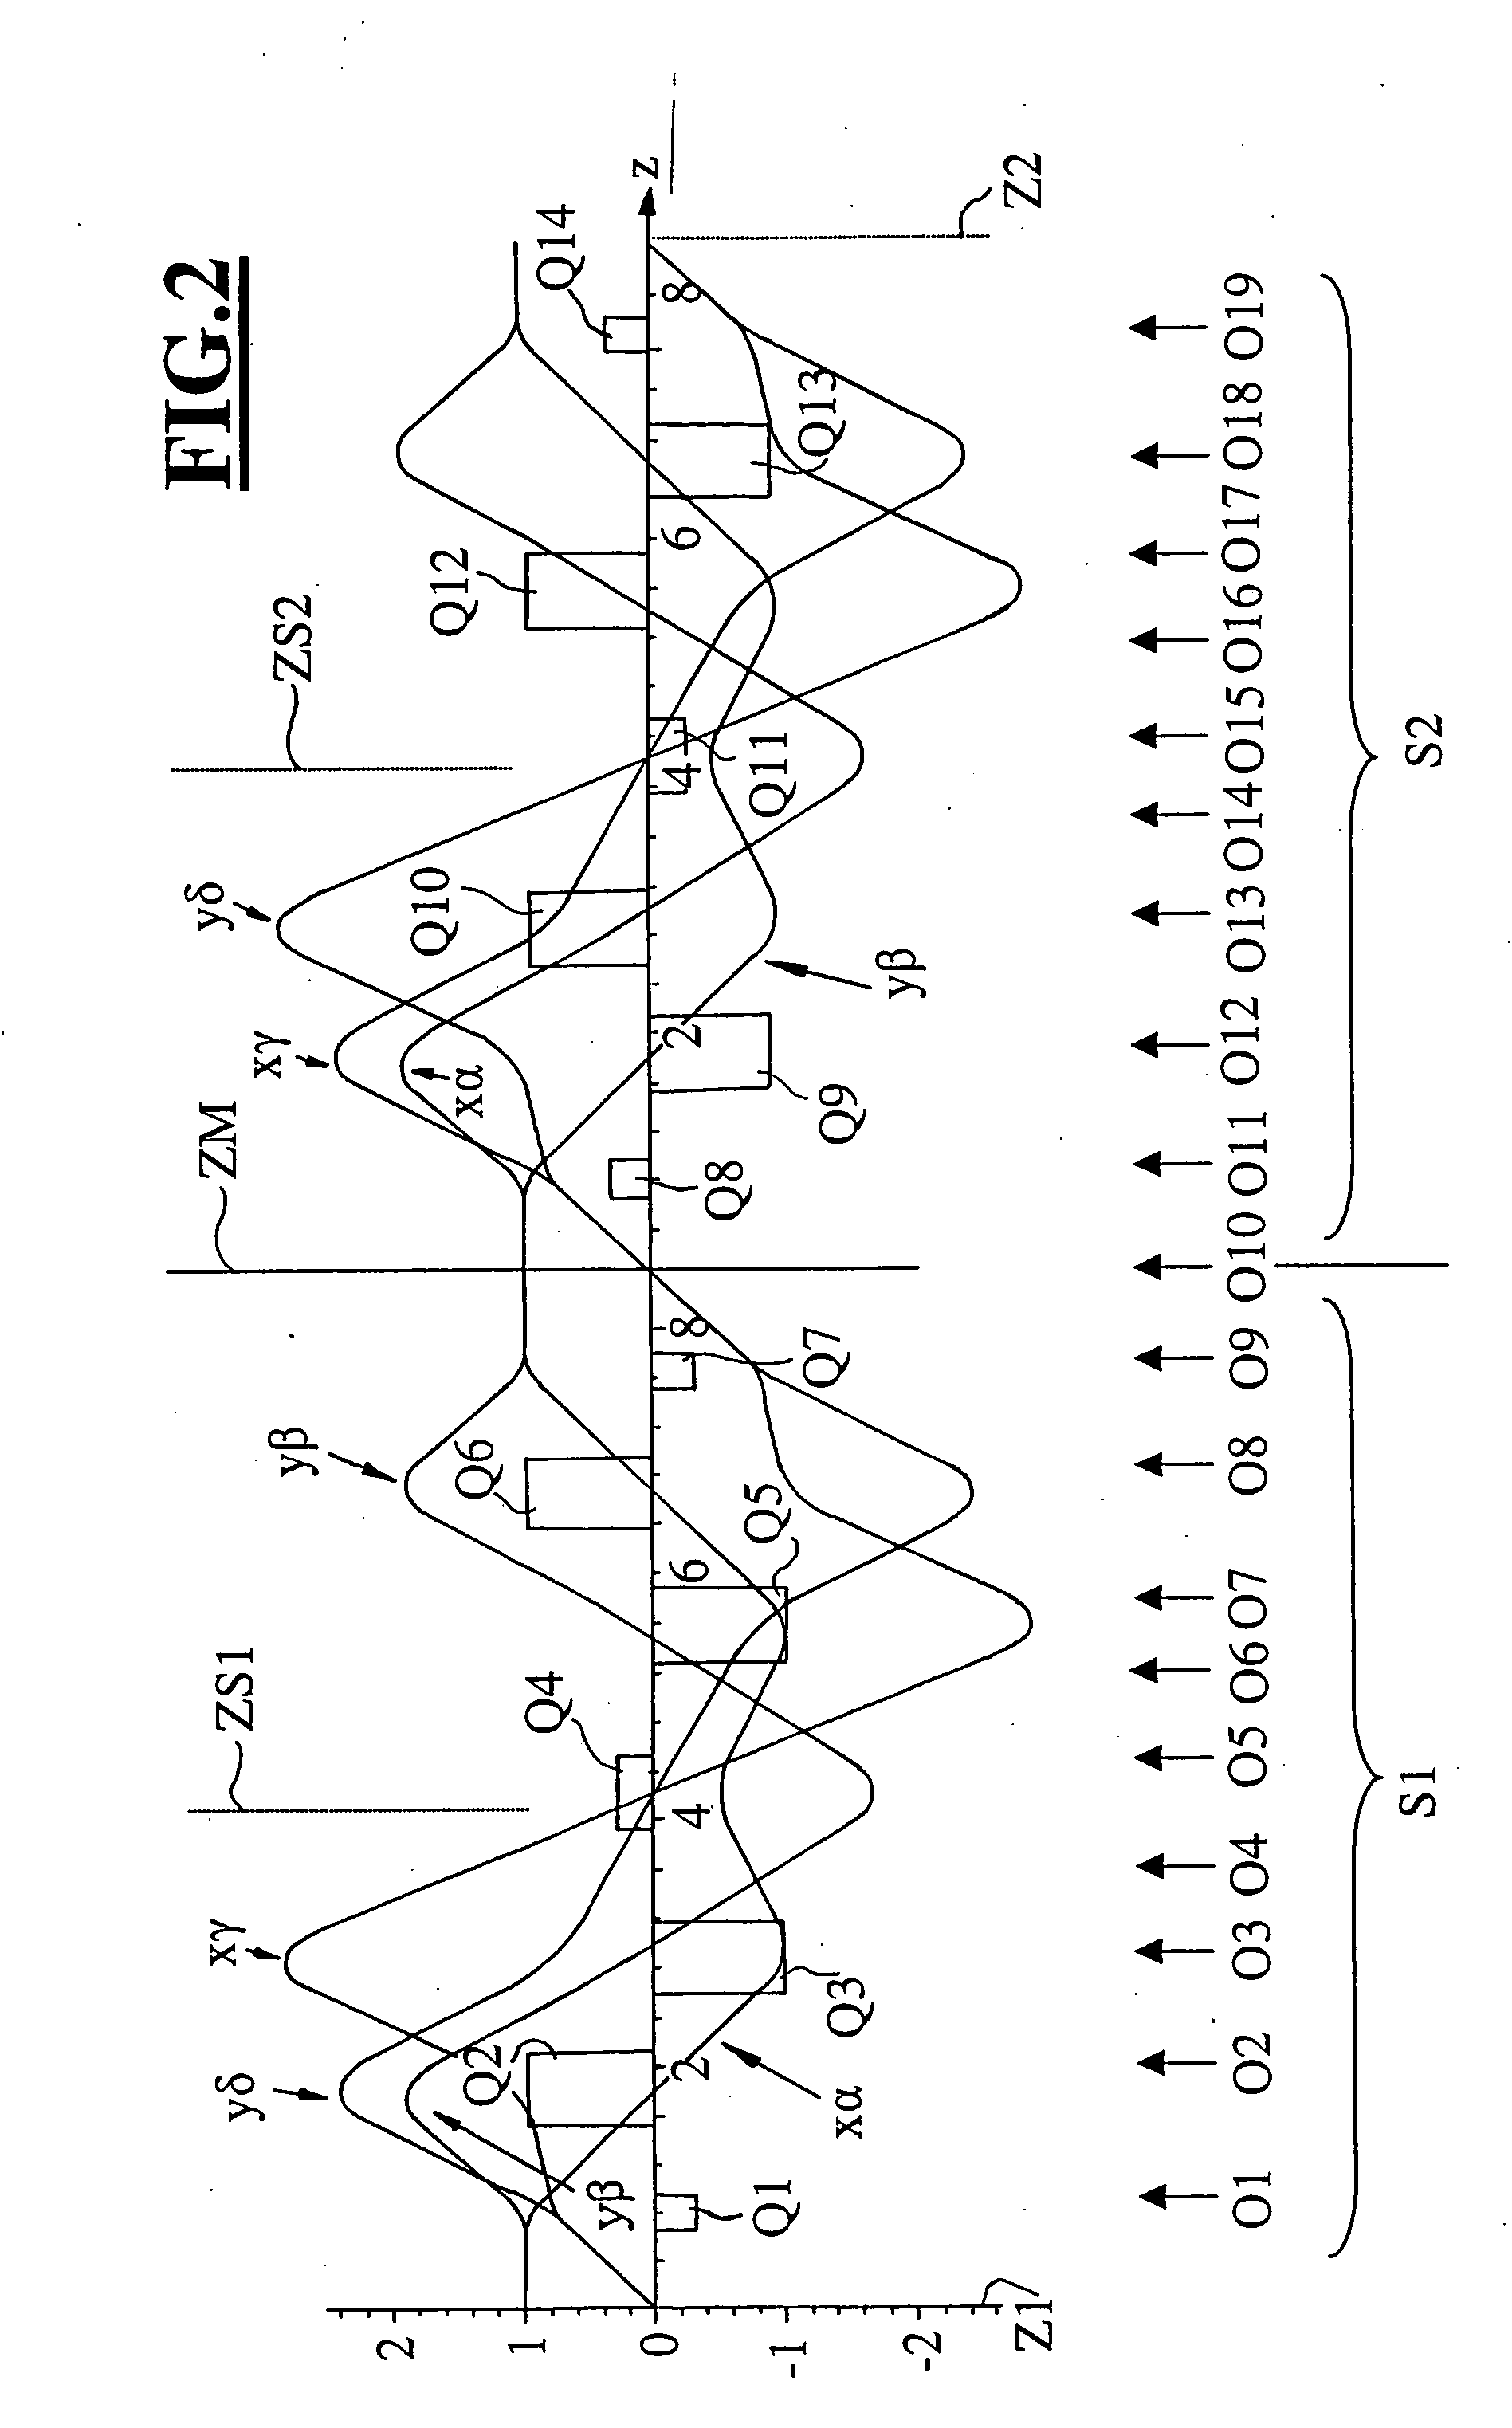 Corrector for correcting first-order chromatic aberrations of the first degree